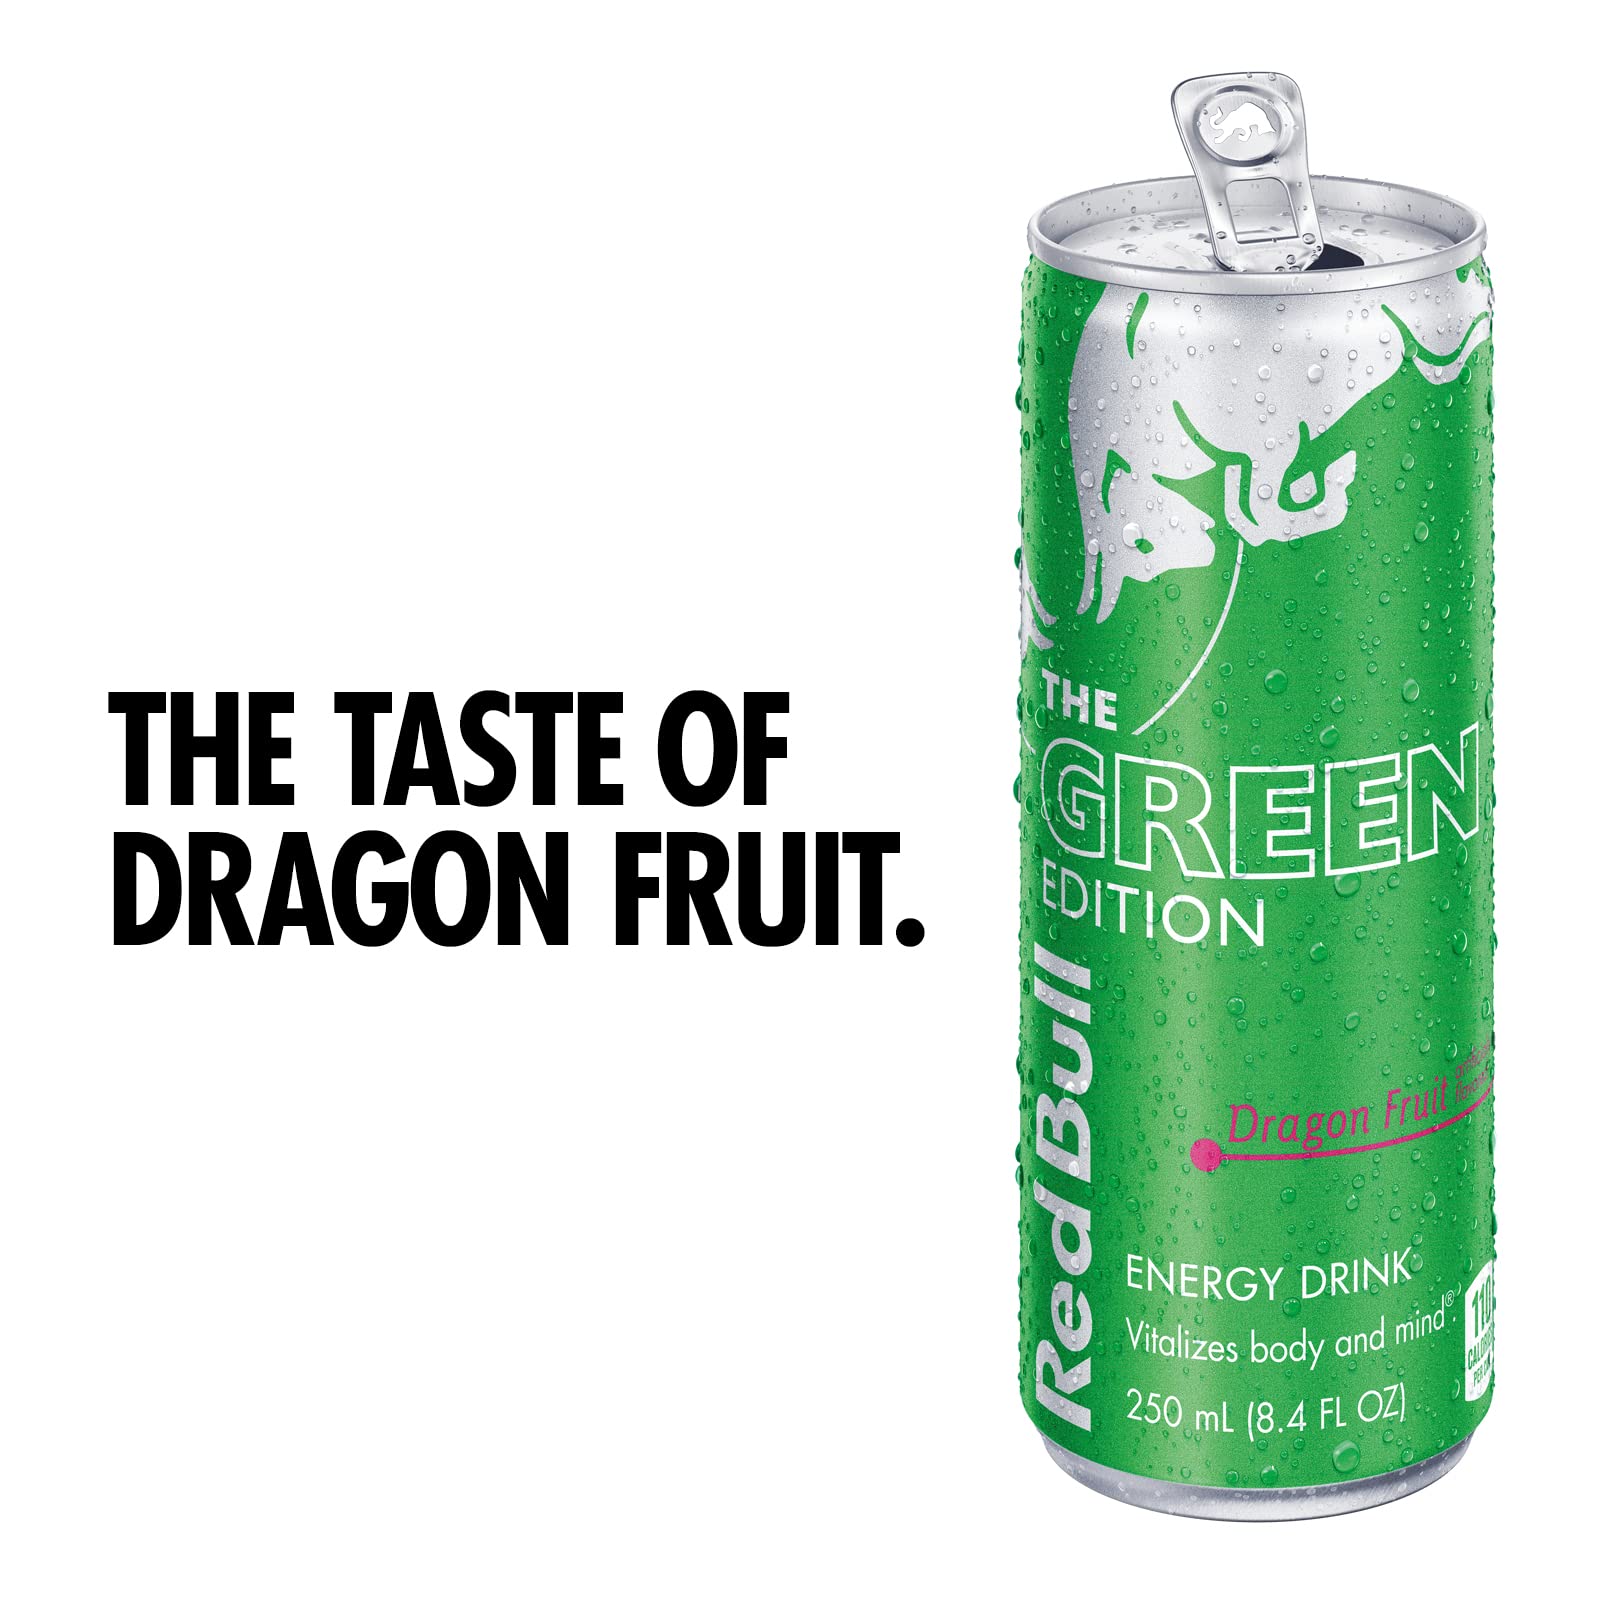 Red Bull Green Edition Dragon Fruit Energy Drink, 8.4 Fl Oz, 4 Cans